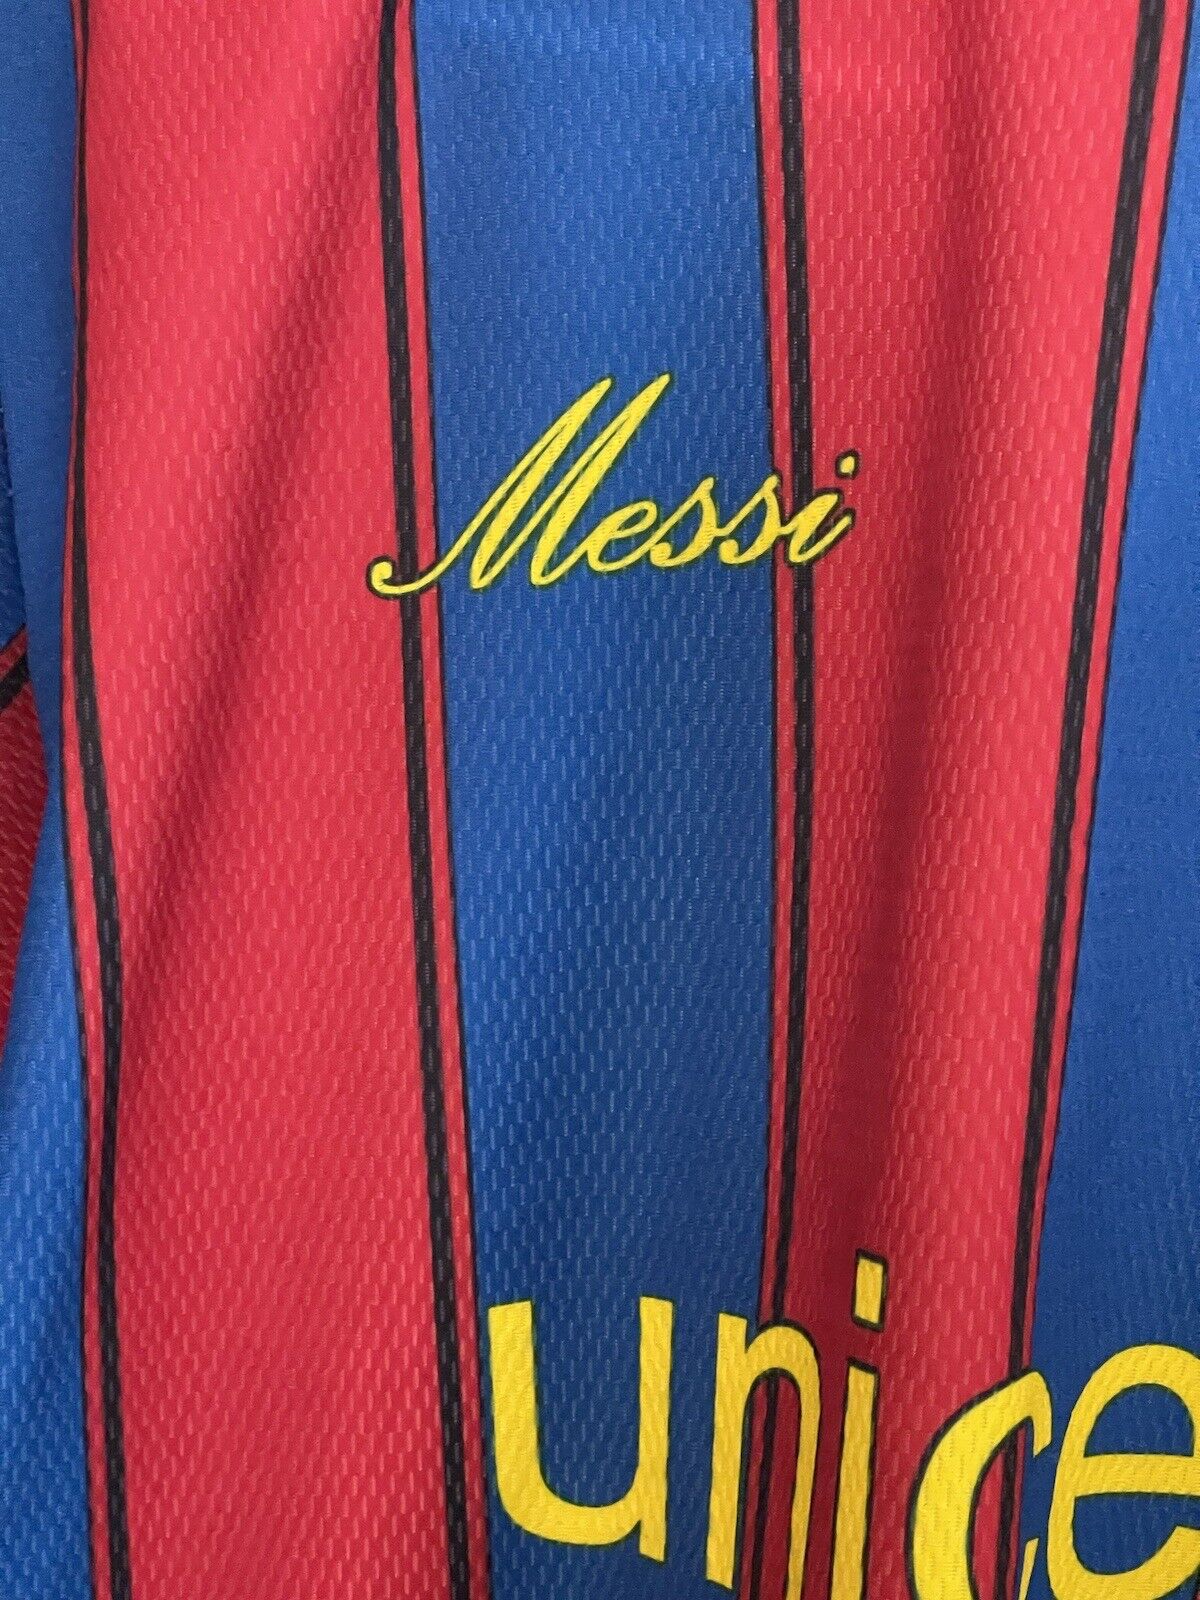 Barcelona Messi Soccer Jersey Shirt 2009/10 #10 size Small